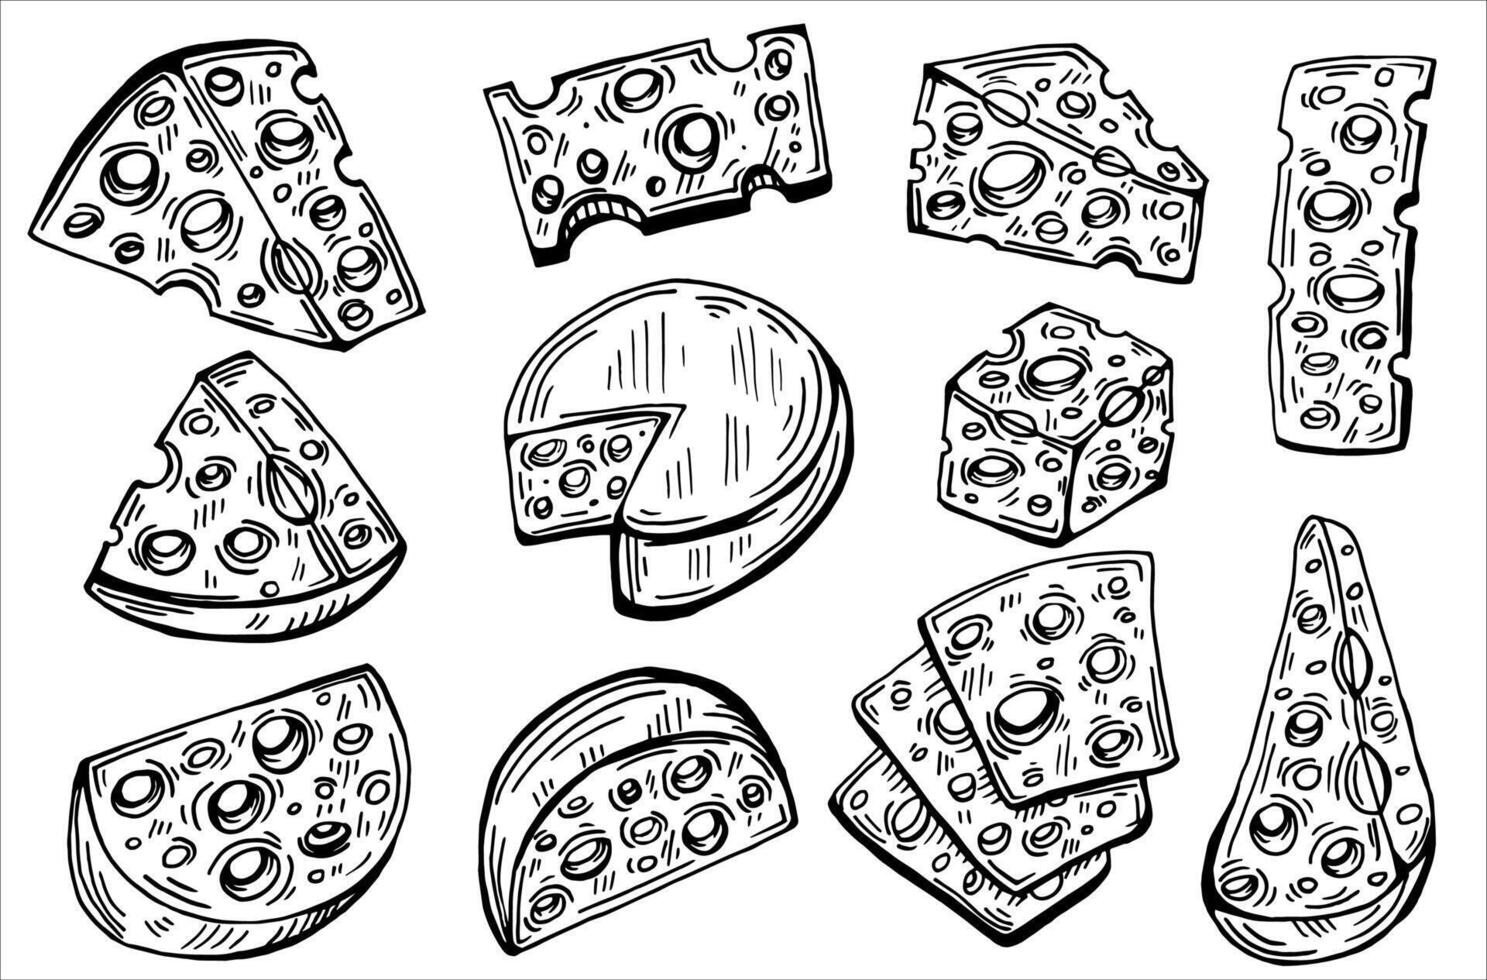 Hand Draen Cheese set. Sketch hand drawn different type cheese vector